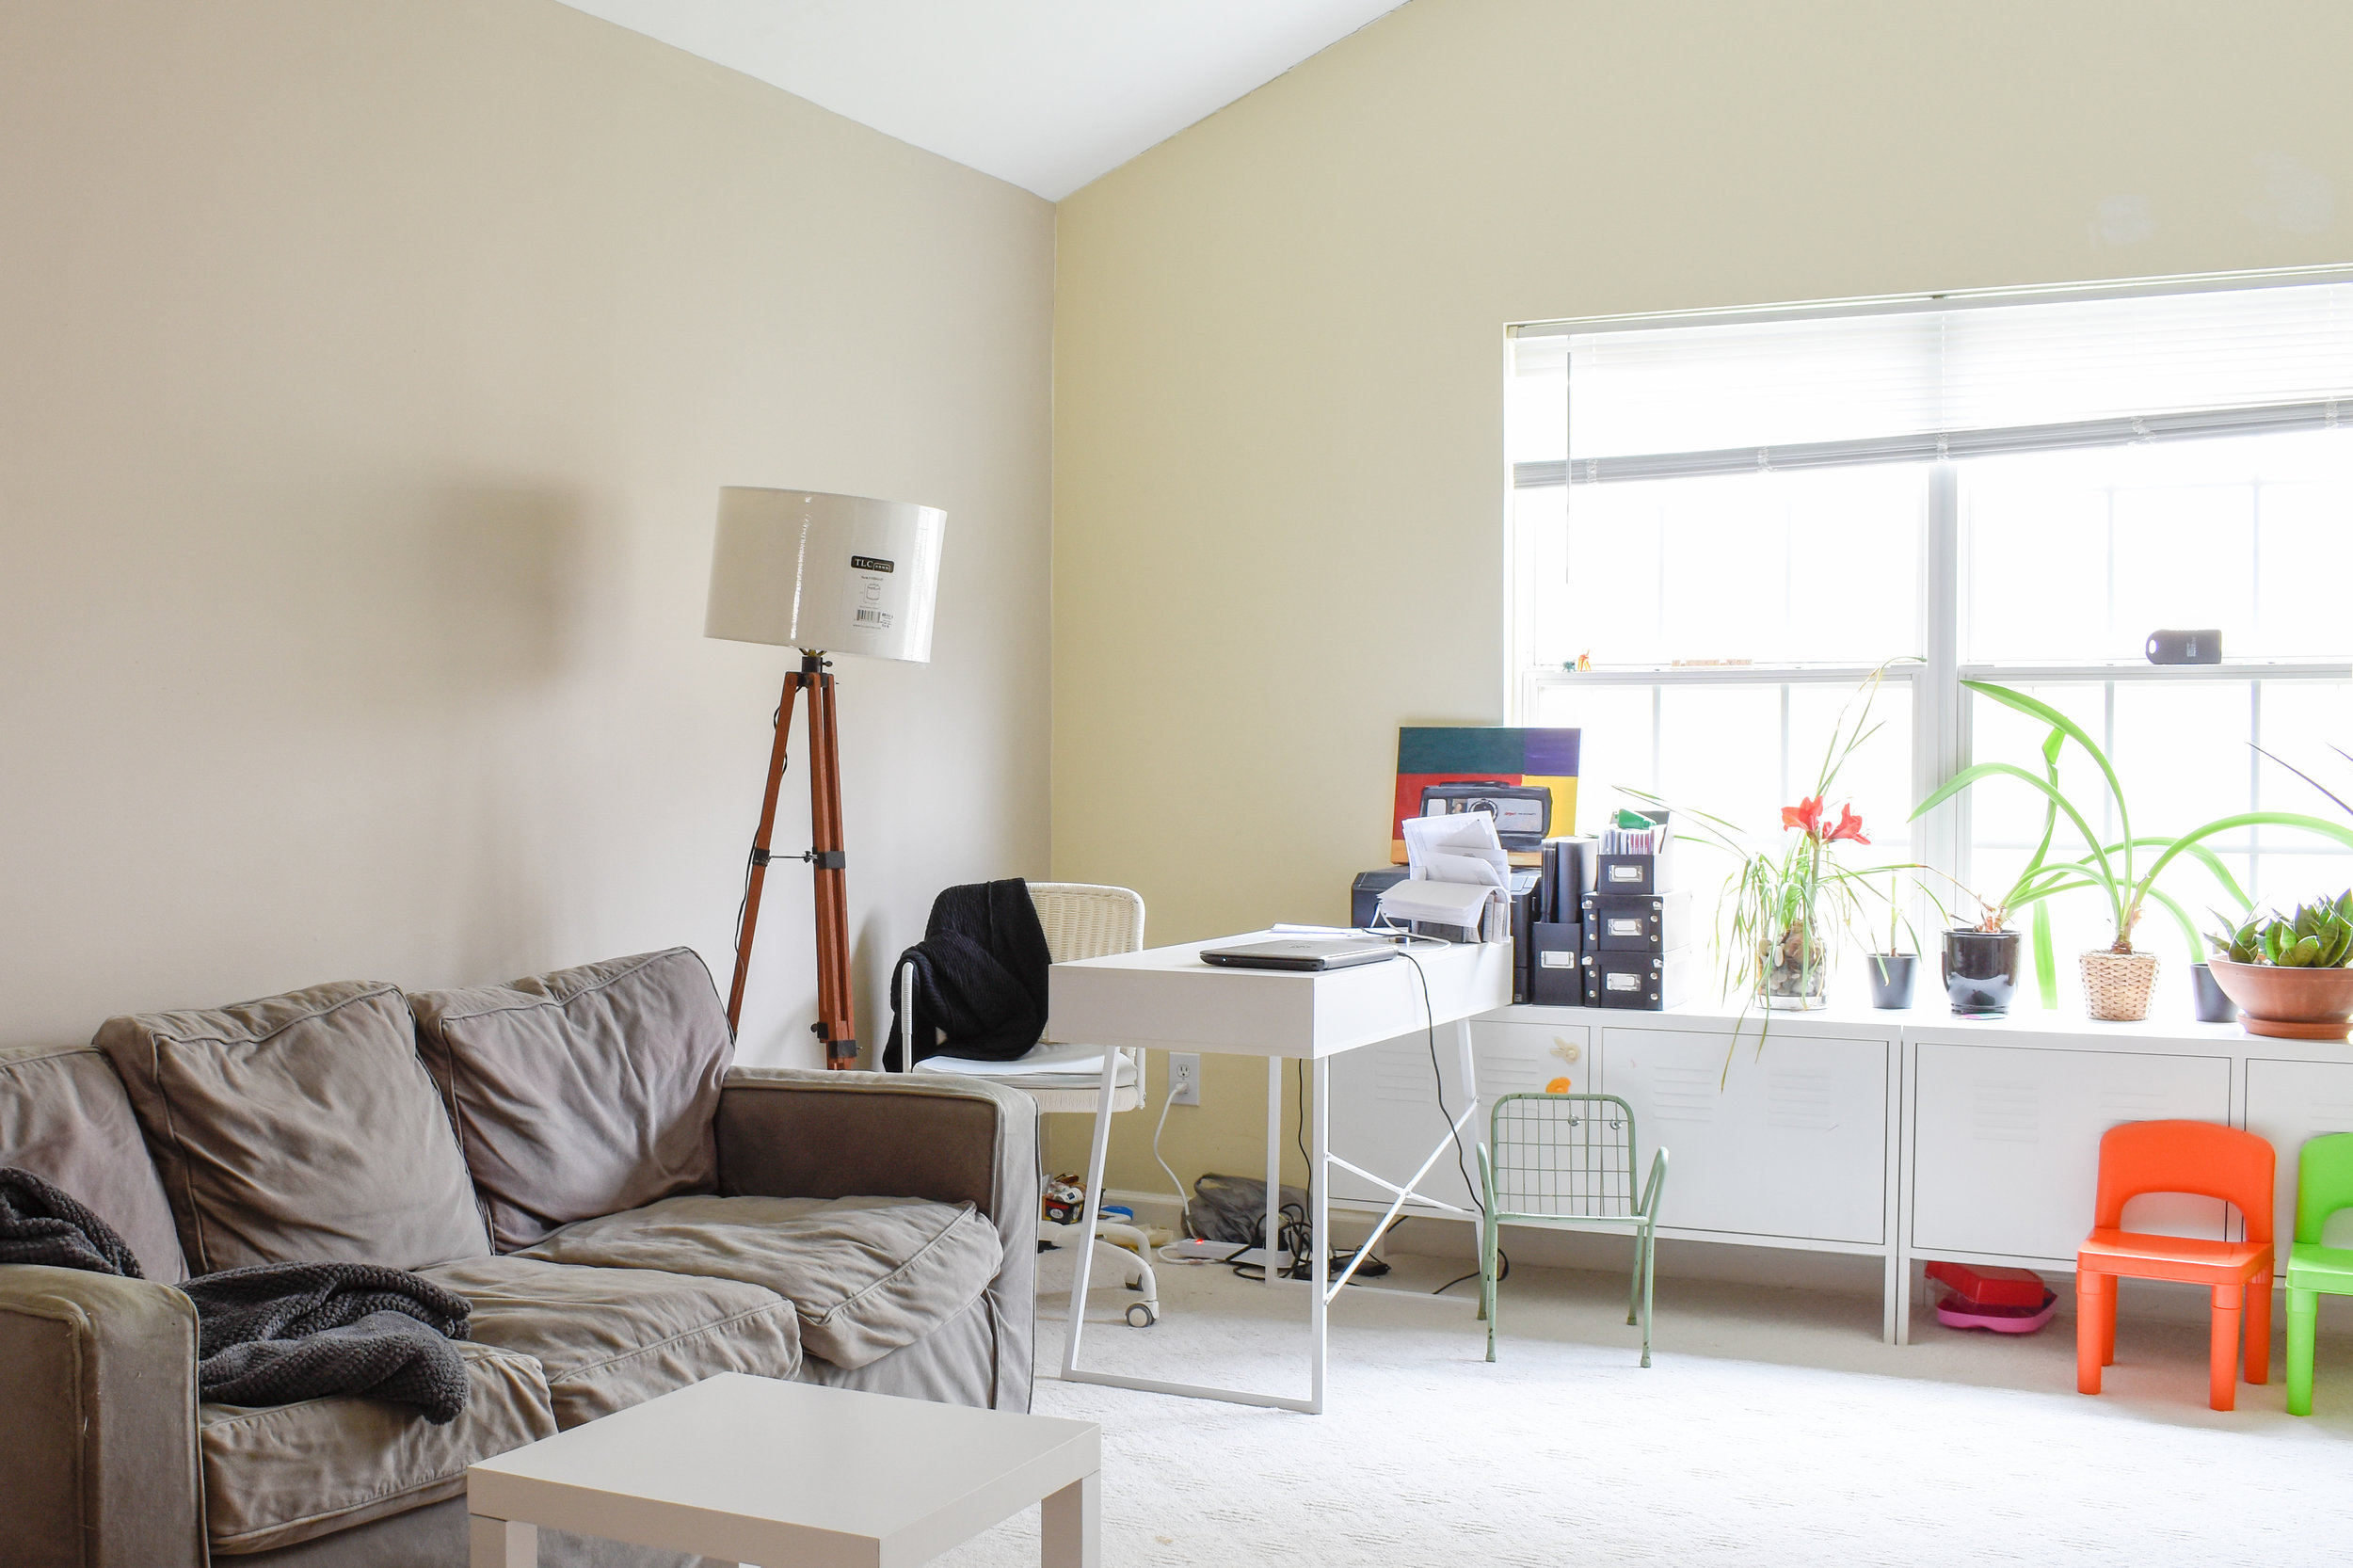 A haphazard bonus room gets a fresh facelift during this Spring's One Room Challenge.